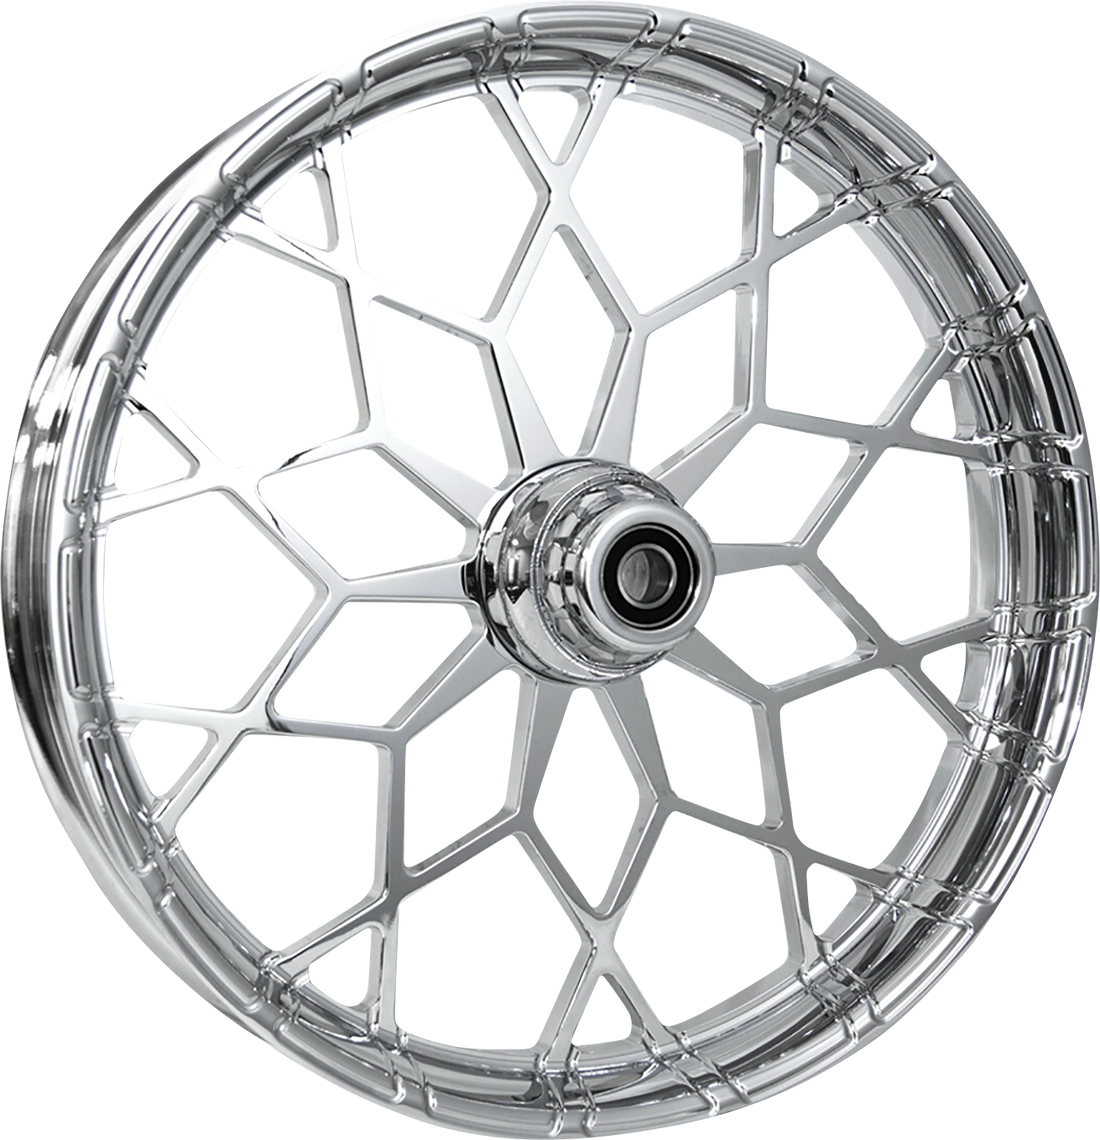 0213-0876 - RC COMPONENTS Wheel - Phenom - Front - Dual Disc w/ABS - Chrome - 21"x3.50" - FLH 213HD031A21135C